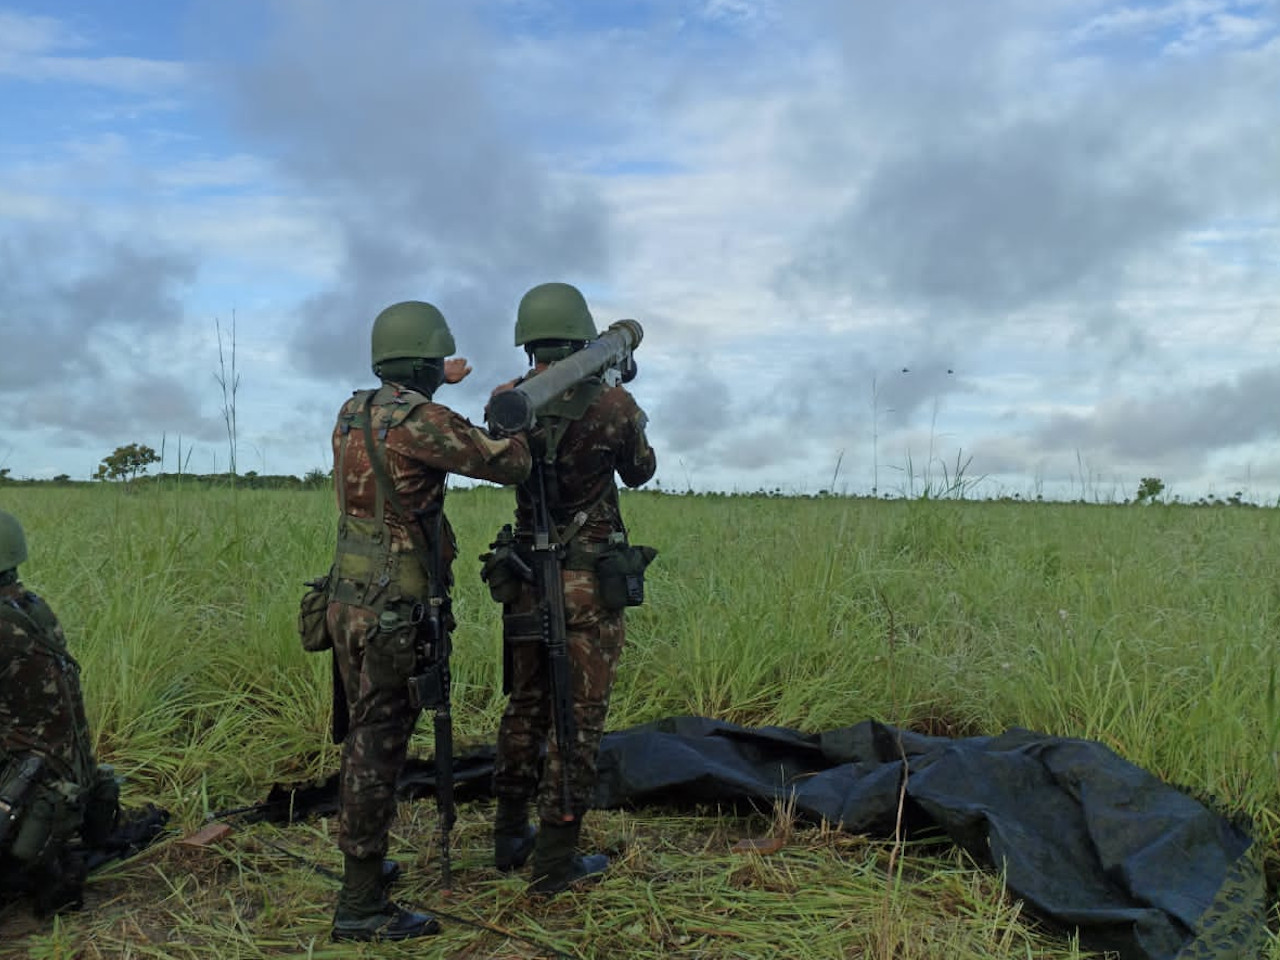 Jungle Artillery shoots down enemy aircraft in simulation exercise